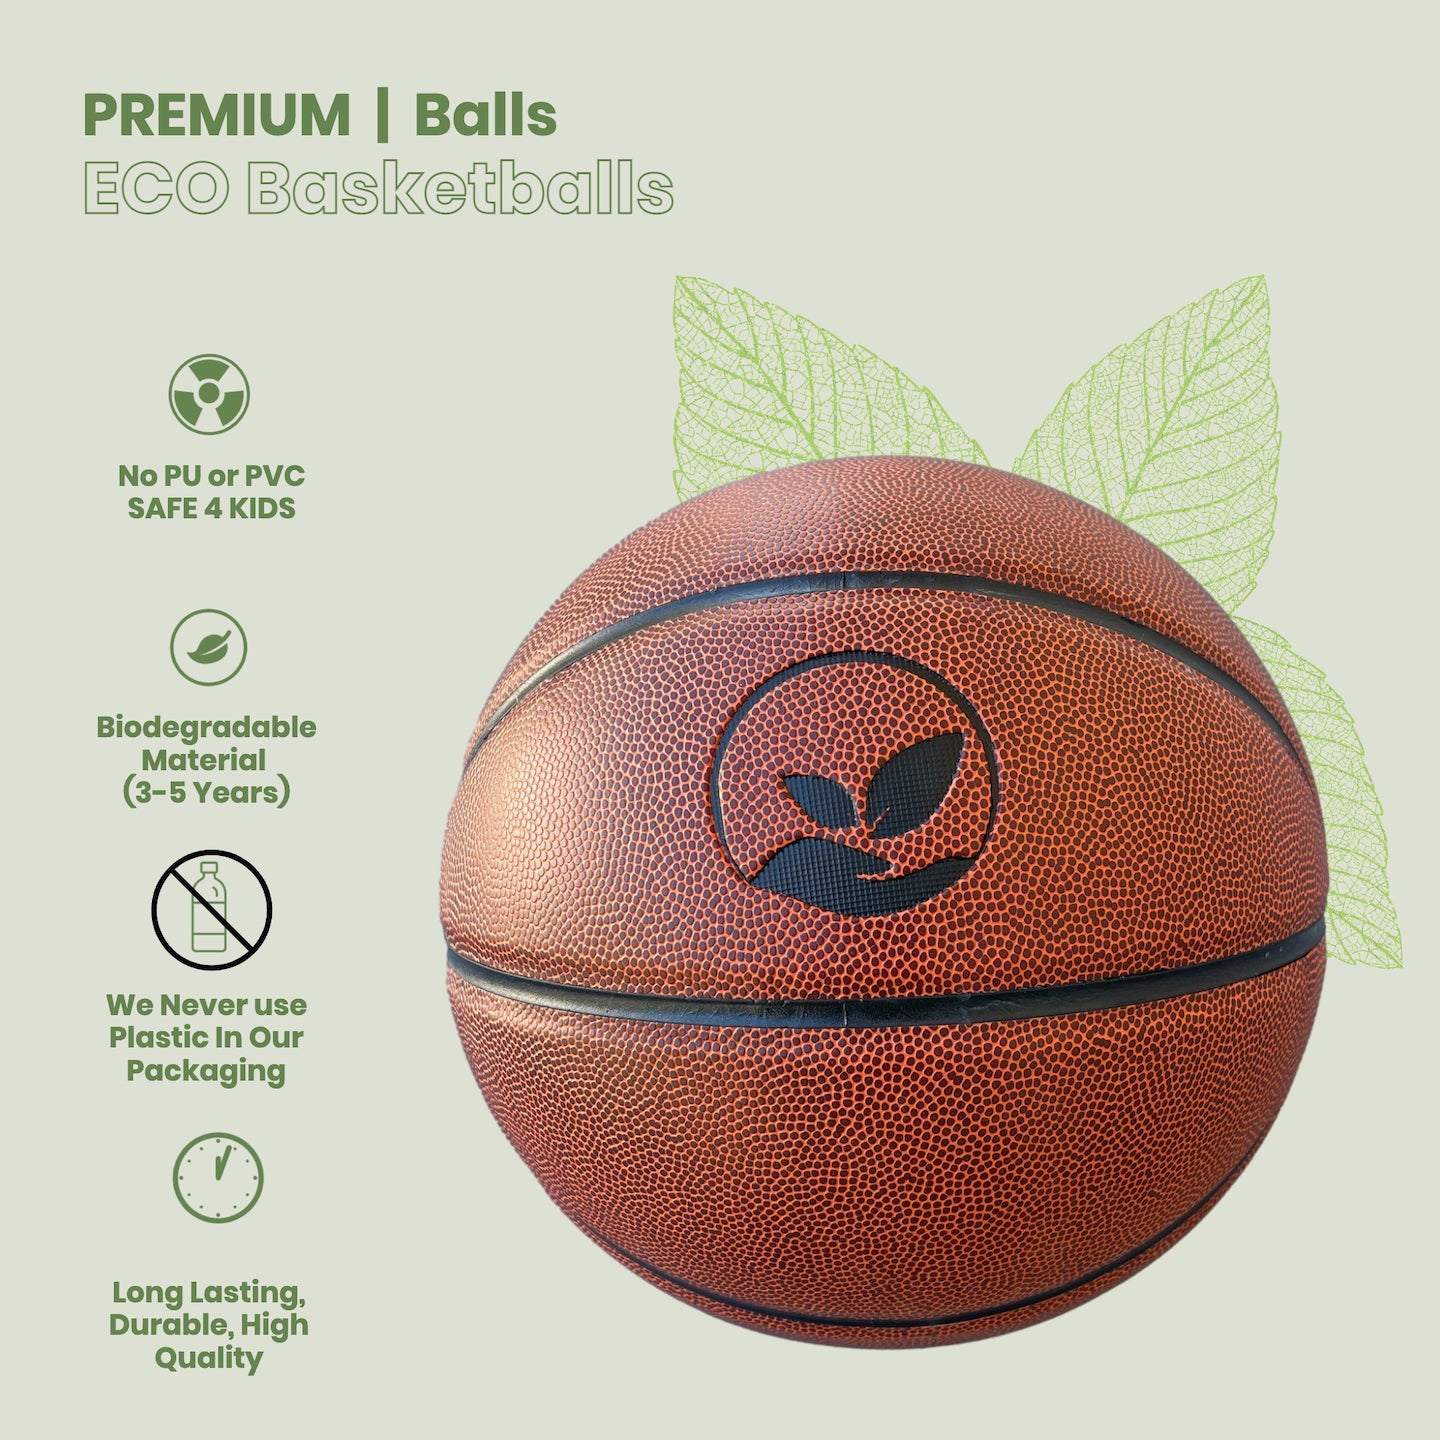 Basketball Team Pack - Wholesale 10 Basketballs in Men's, Women's and Youth Sizes